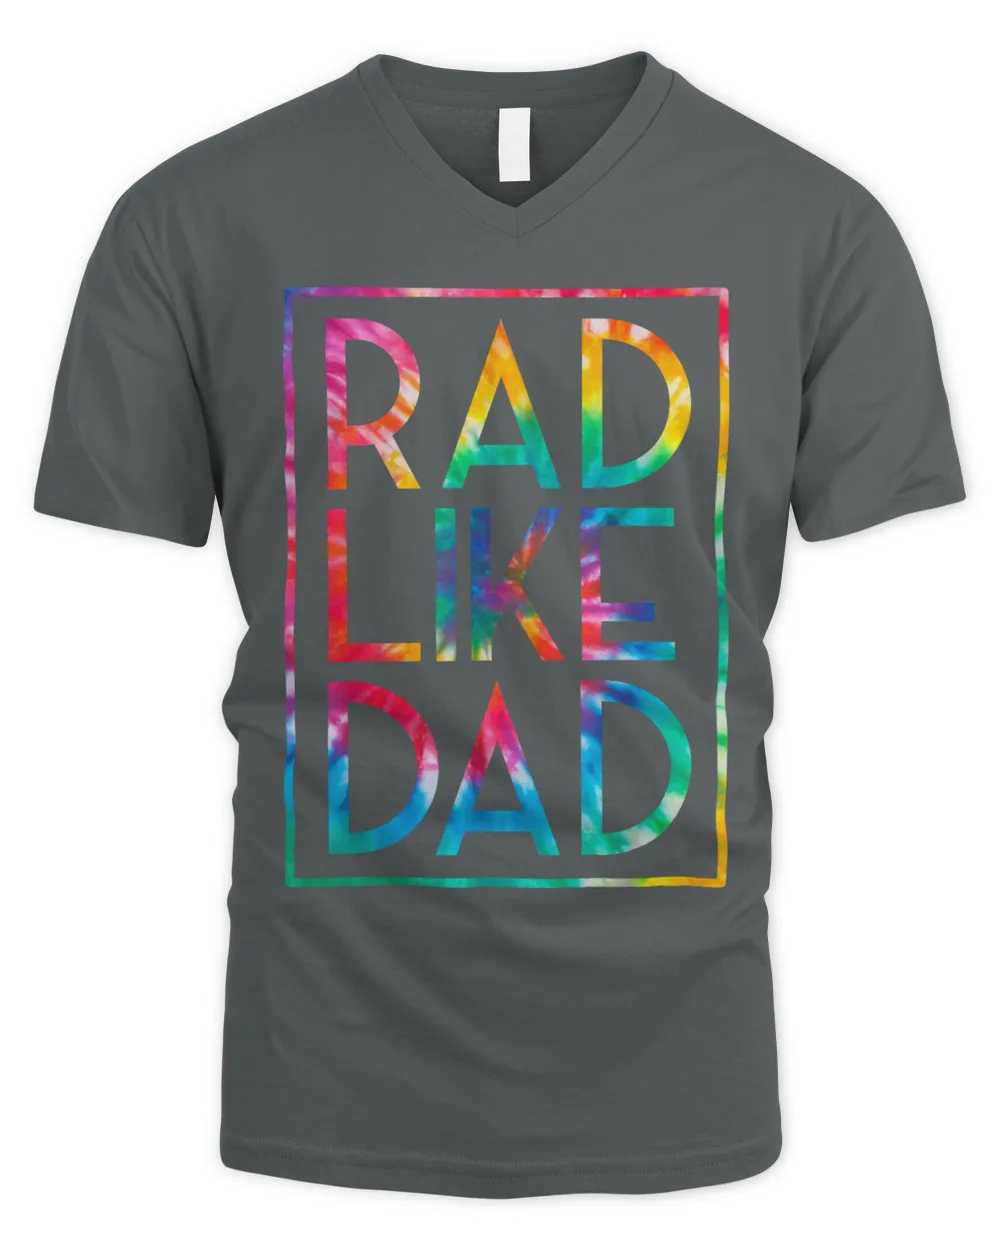 Rad Like Dad Tie Dye Funny Fathers Day Toddler Boy Girl T-Shirt